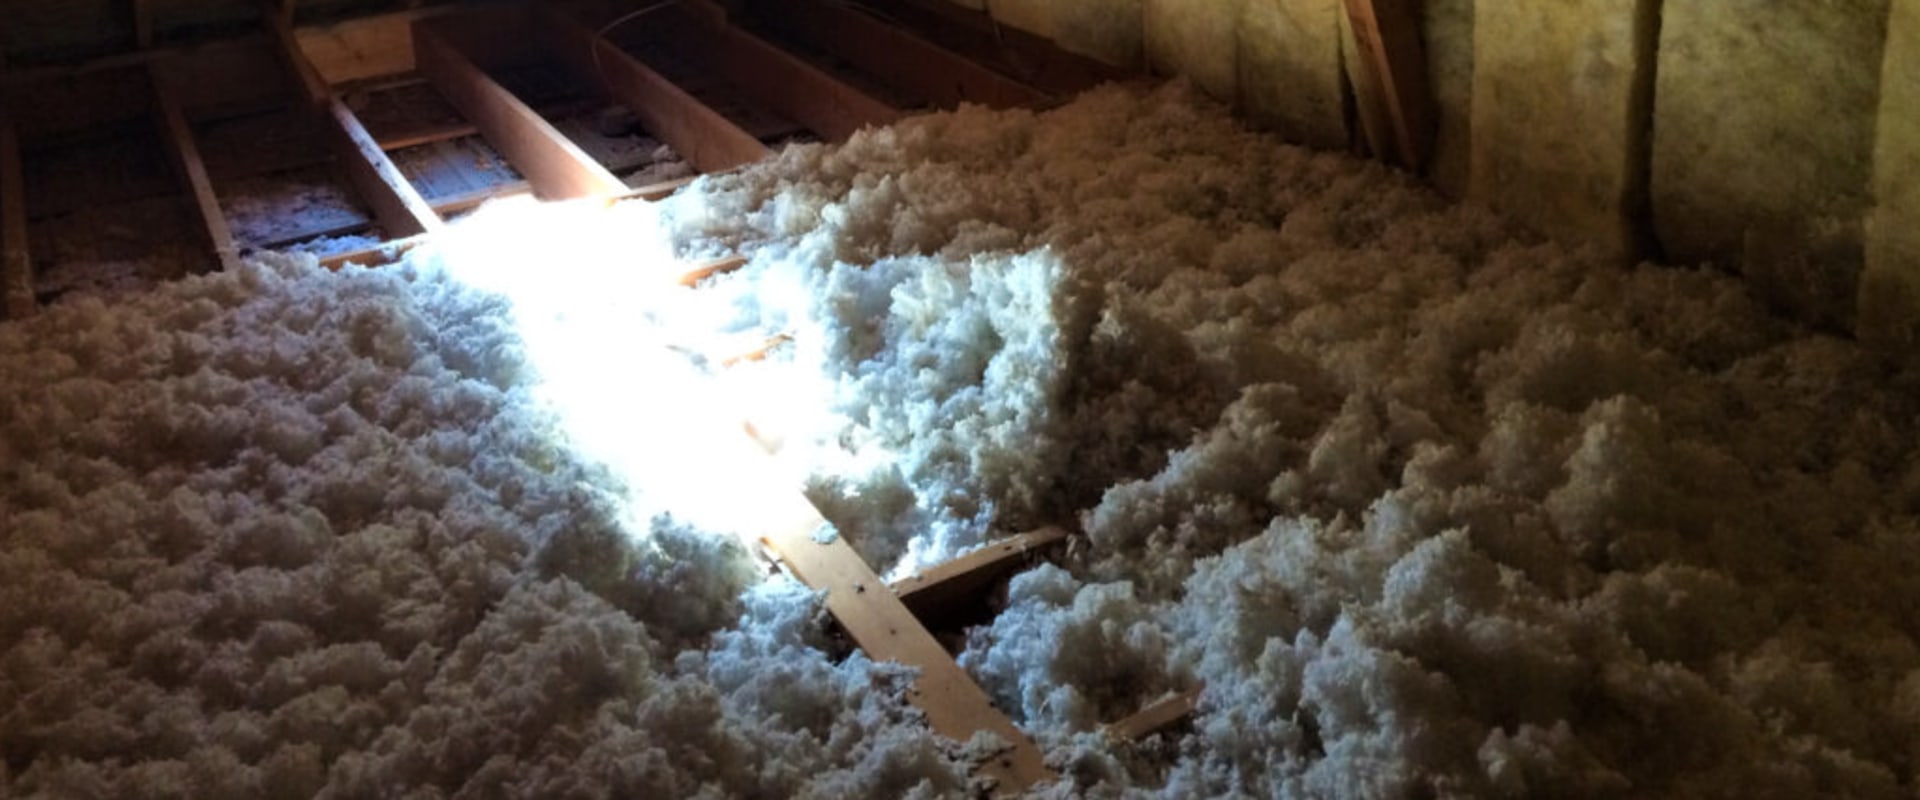 Why You Should Get Rid of Old Attic Insulation